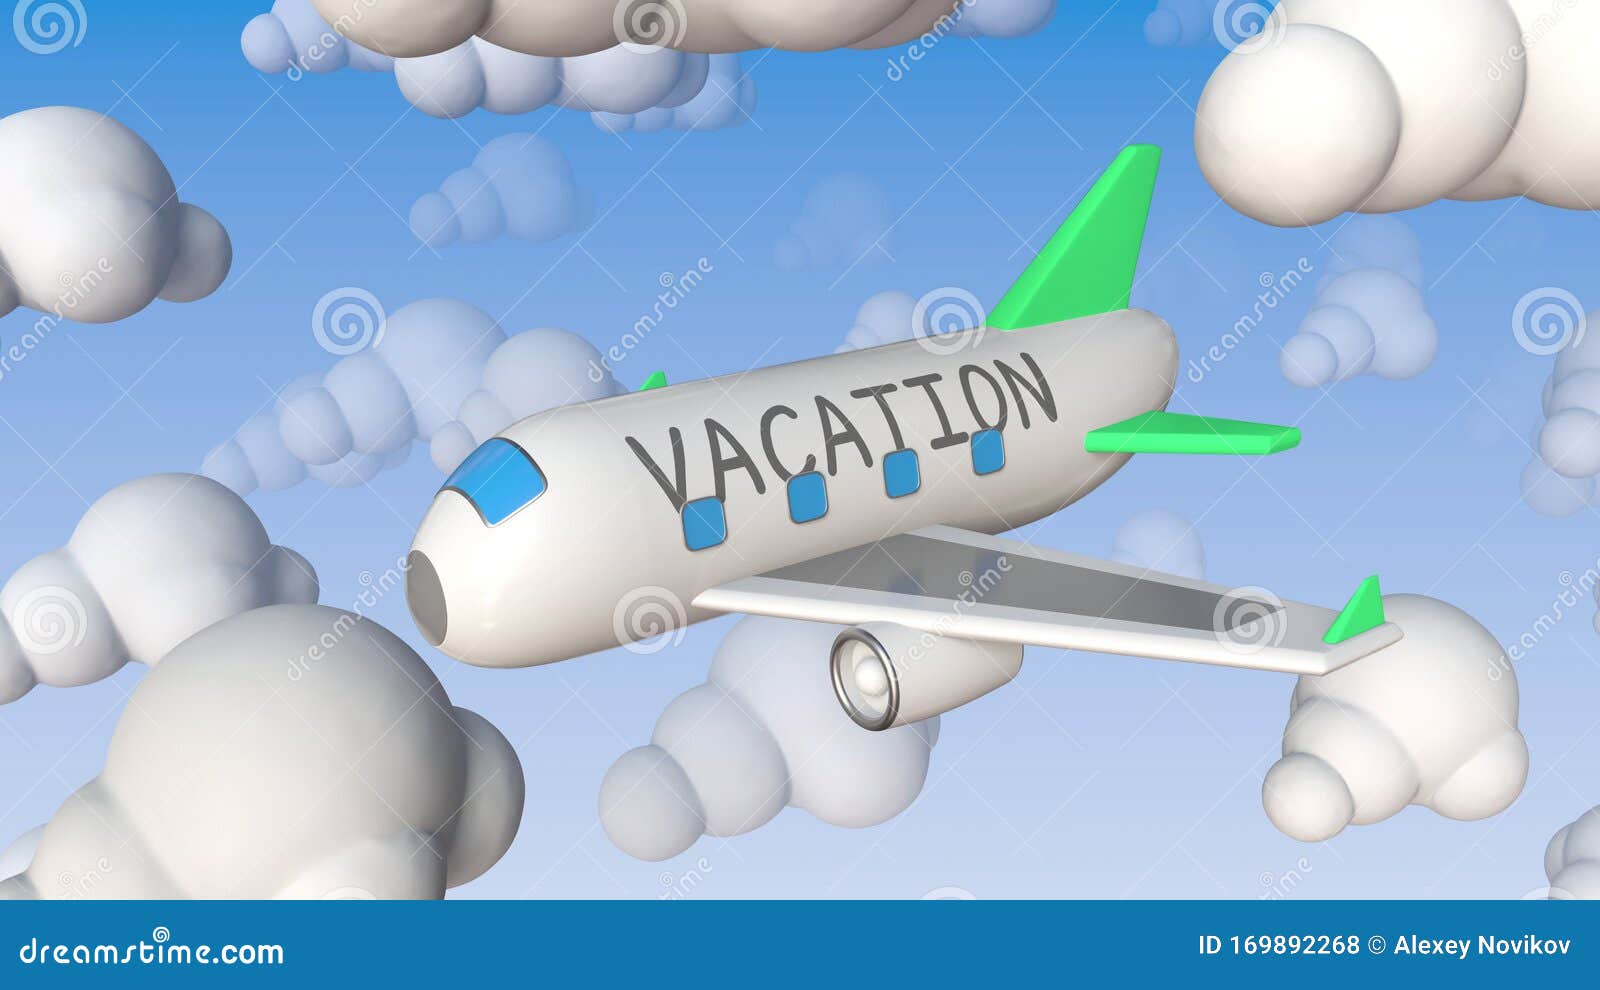 Download Toy Airplane With Vacation Text Flies Between Cloud Mockups Conceptual Loopable 3d Rendering Stock Illustration Illustration Of Clouds Airliner 169892268